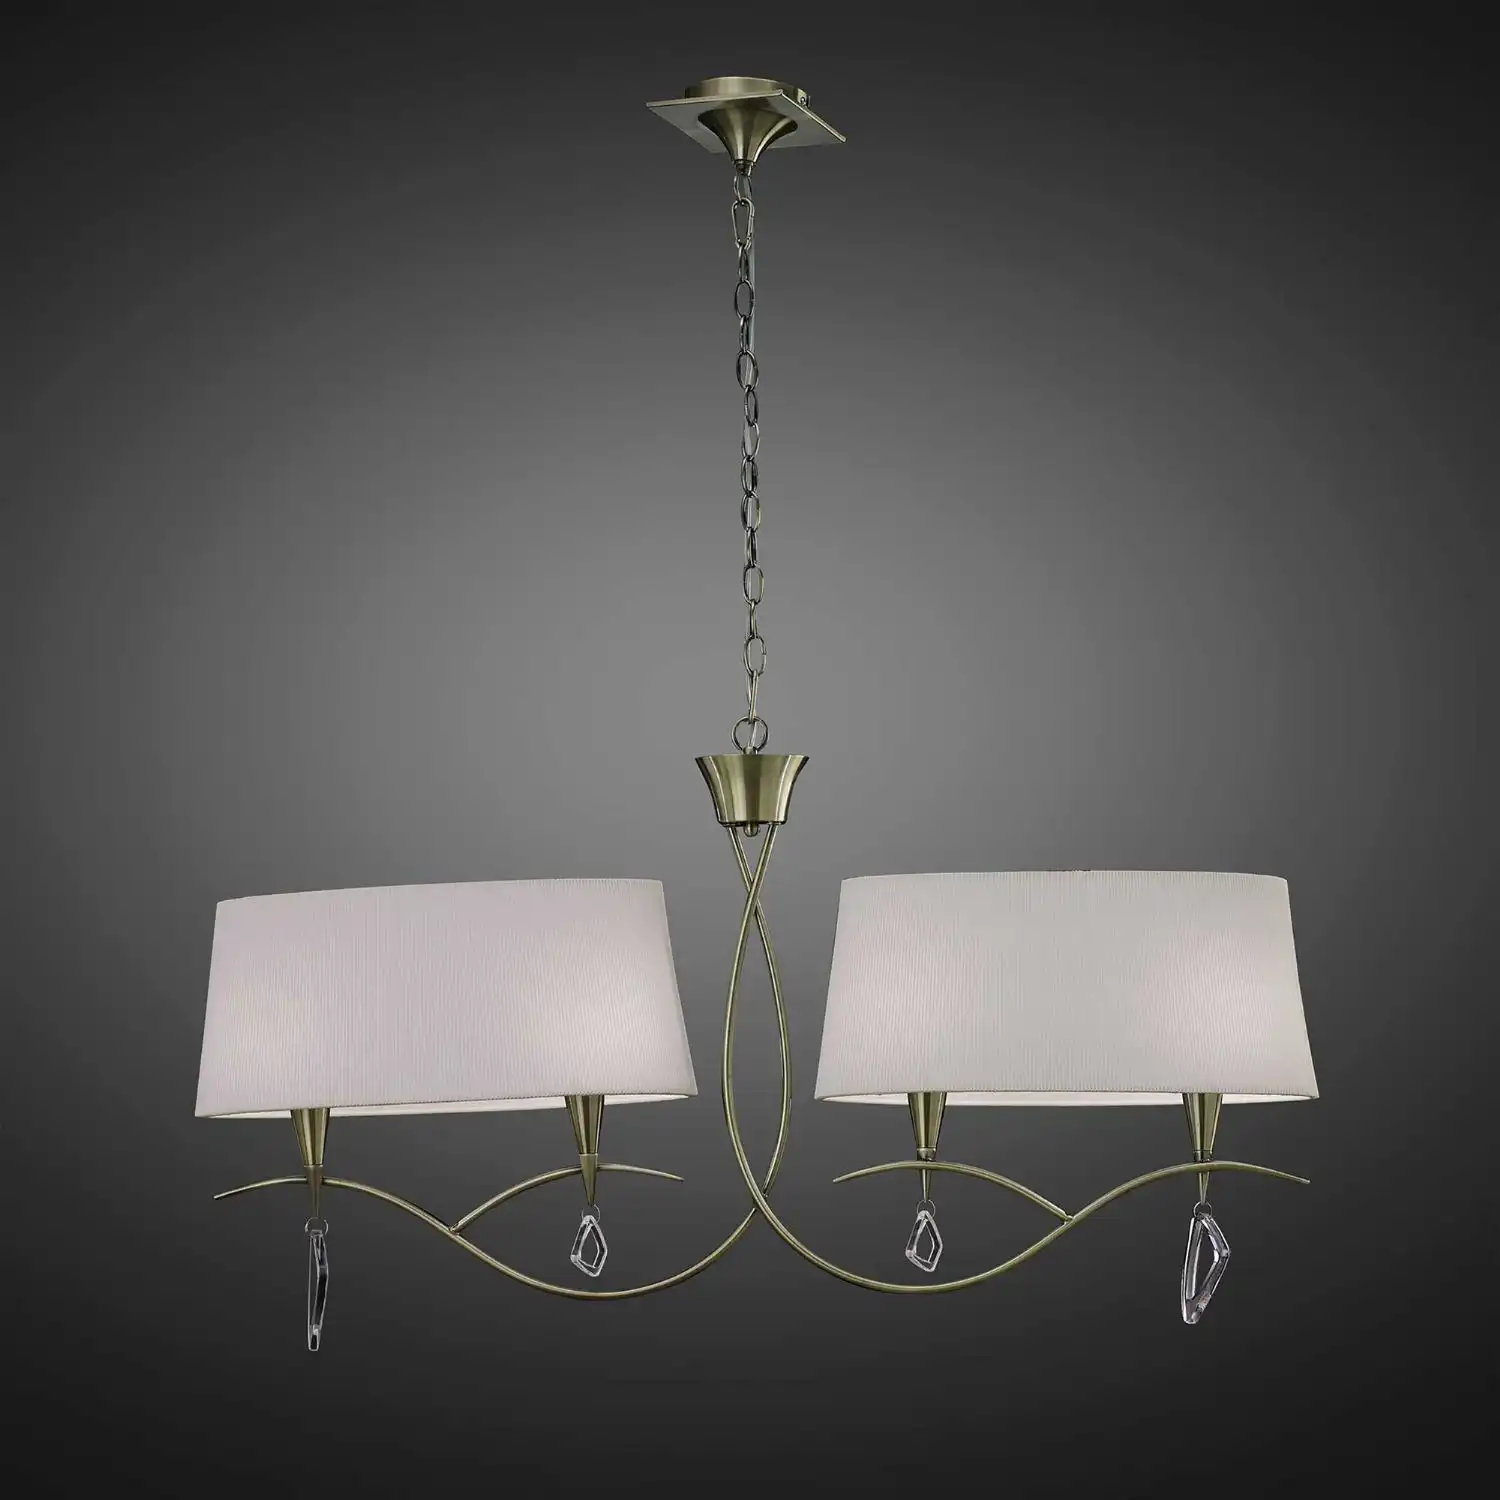 Mara Linear Pendant 2 Arm 4 Light E14, Antique Brass With Ivory White Shades